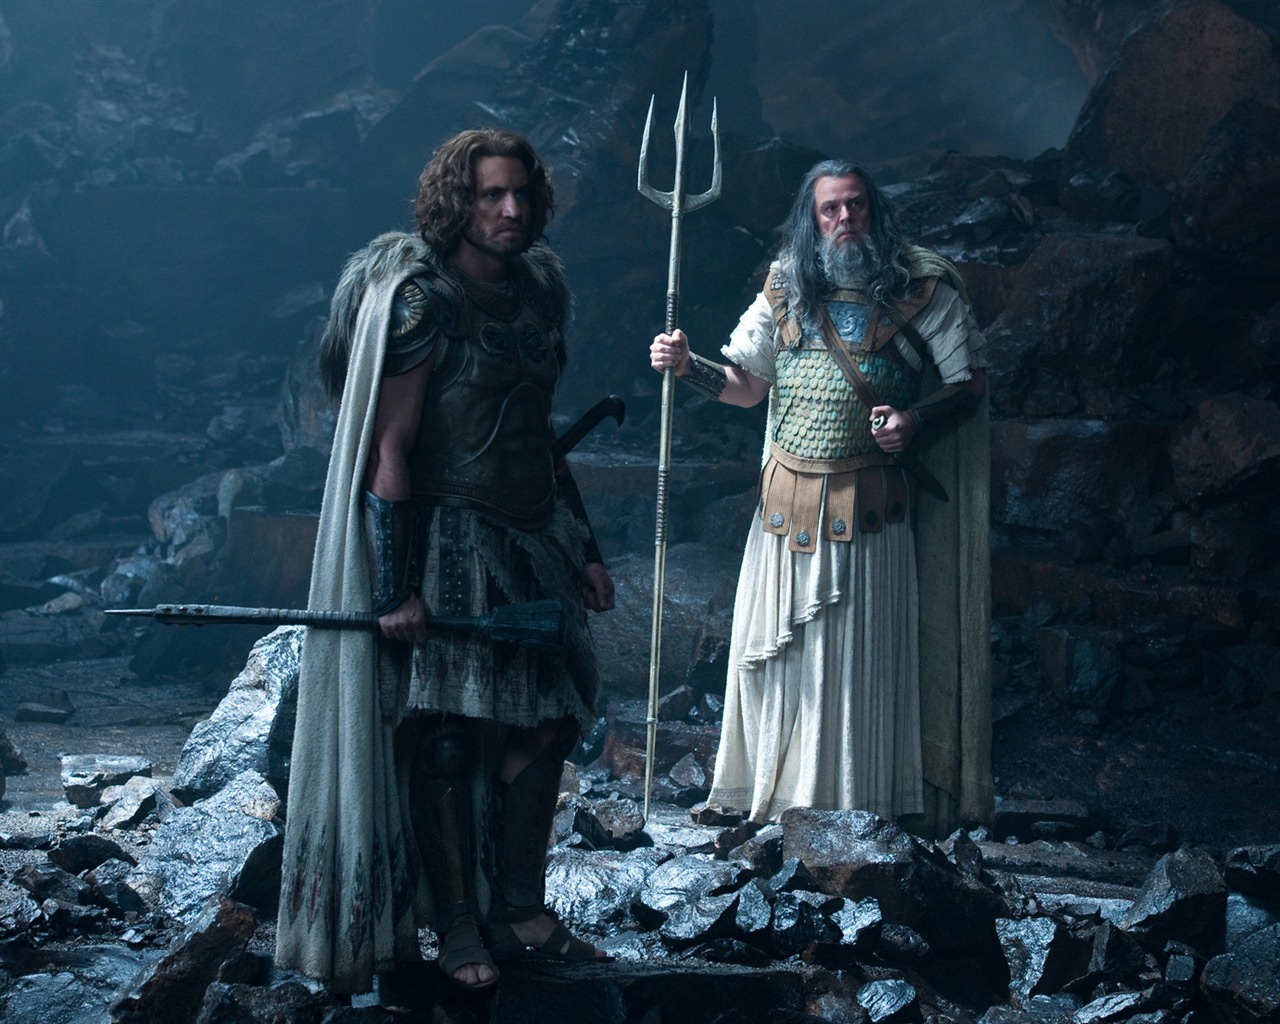 Wrath of the Titans HD Wallpapers #2 - 1280x1024